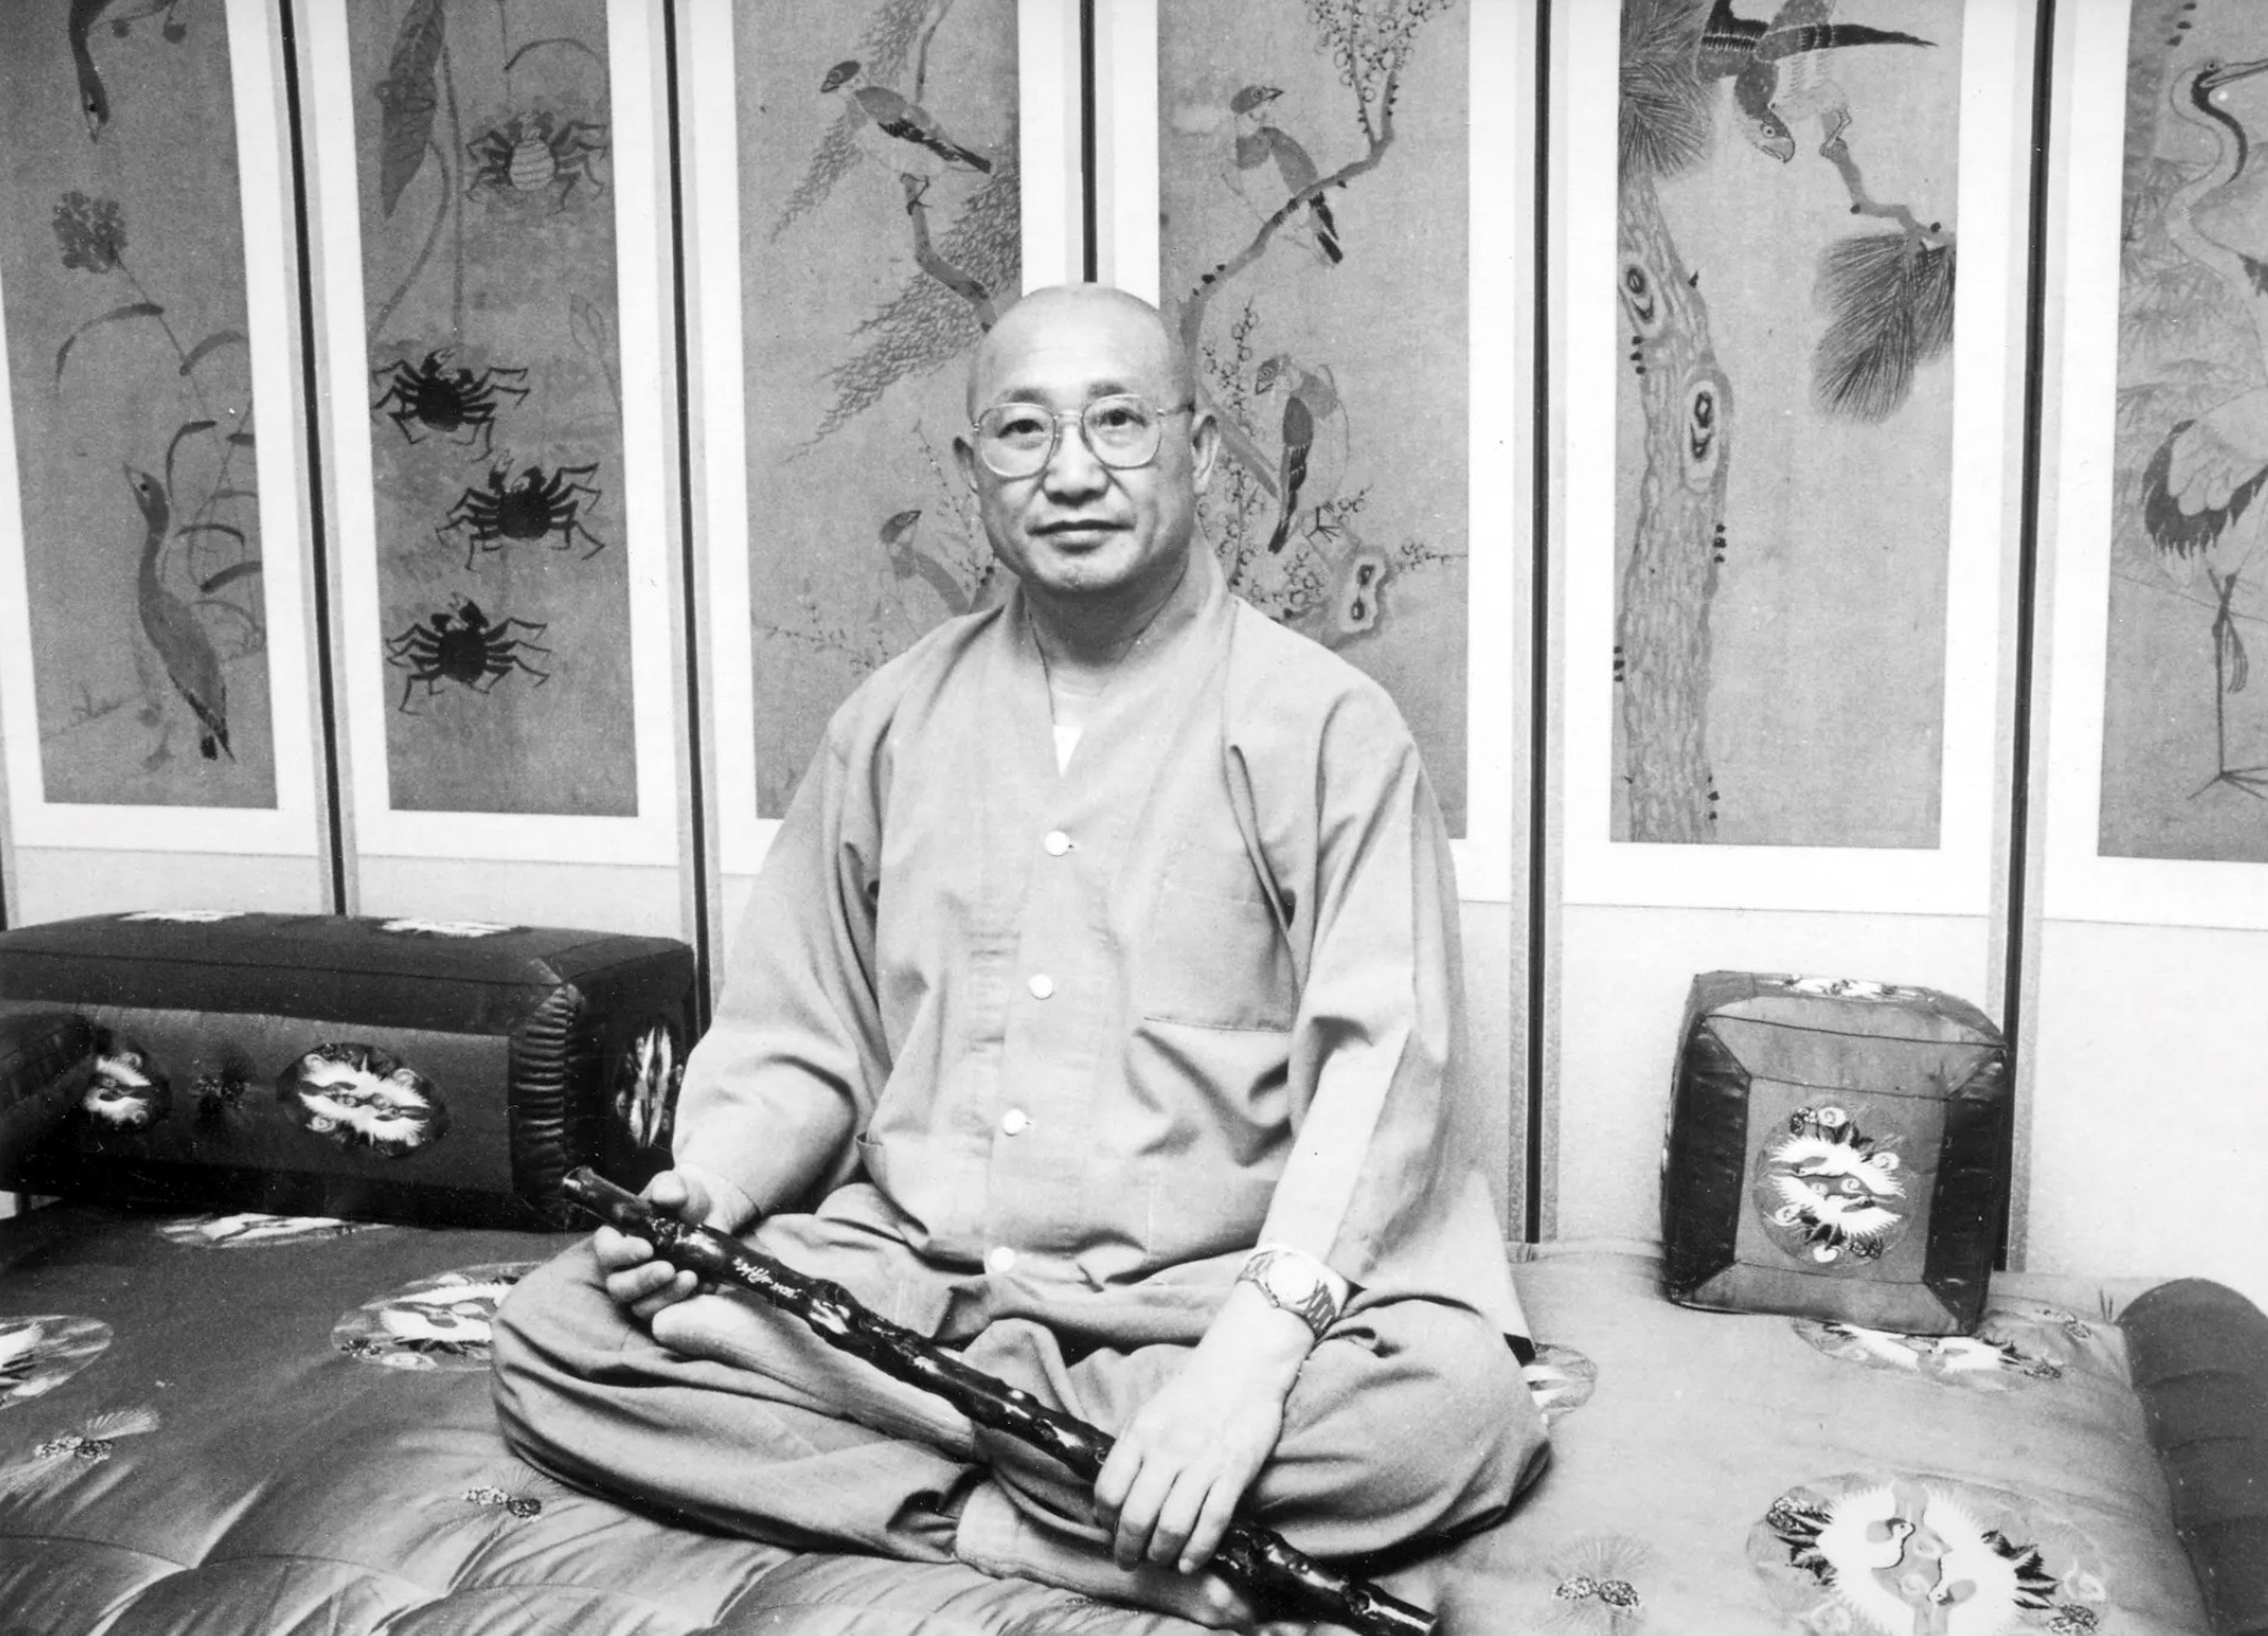 Zen Master Seung Sahn is the first Korean Zen master to live and teach in the United States and founder of the international Kwan Um School of Zen.